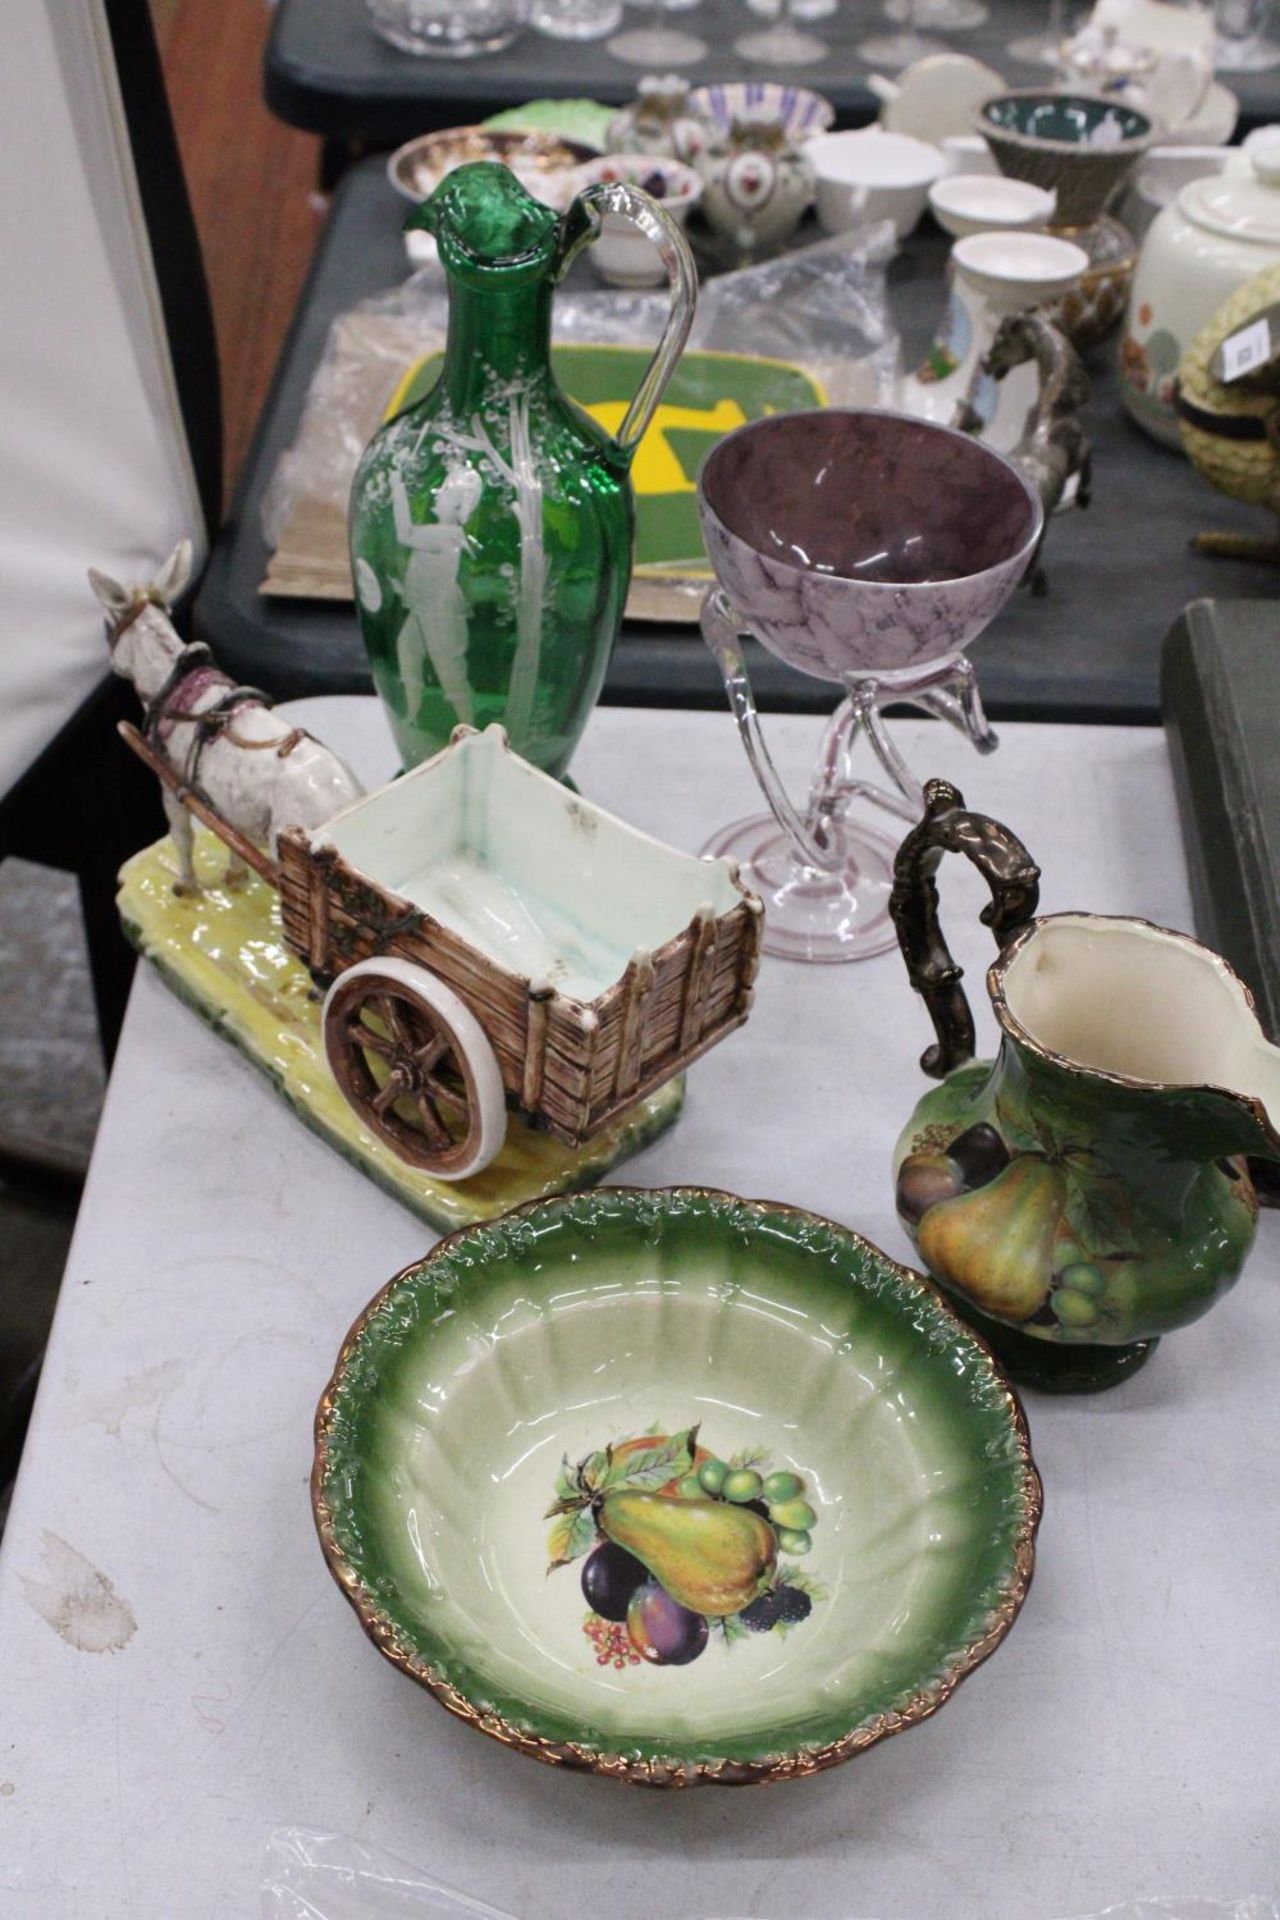 A VINTAGE GREEN MARY GREGORY JUG - A/F, A PIECE OF ART GLASS, CERAMIC DONKEY AND CART PLUS A FRUIT